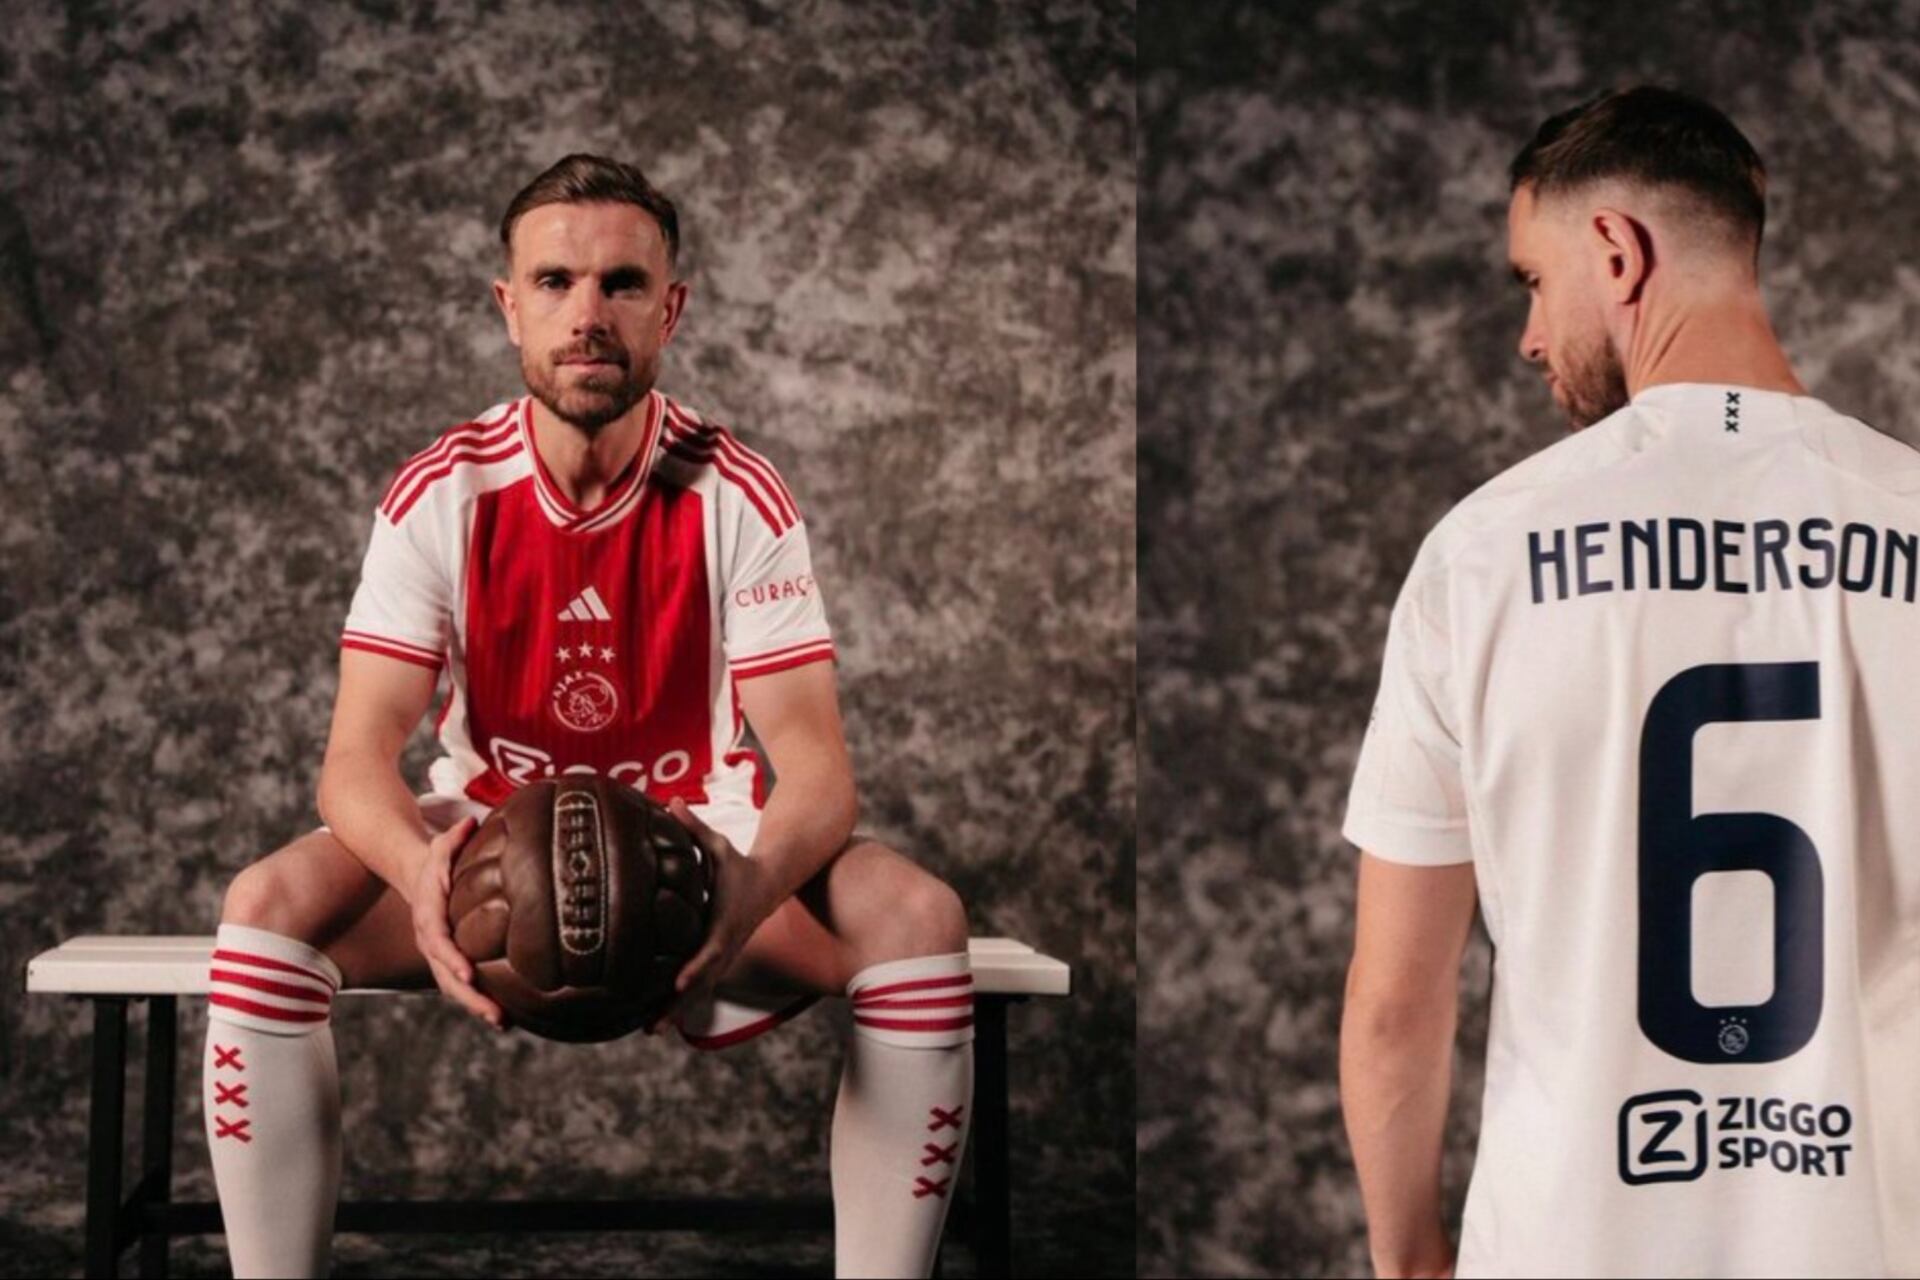 Jordan Henderson's move to Ajax includes some pricey weird merchandise